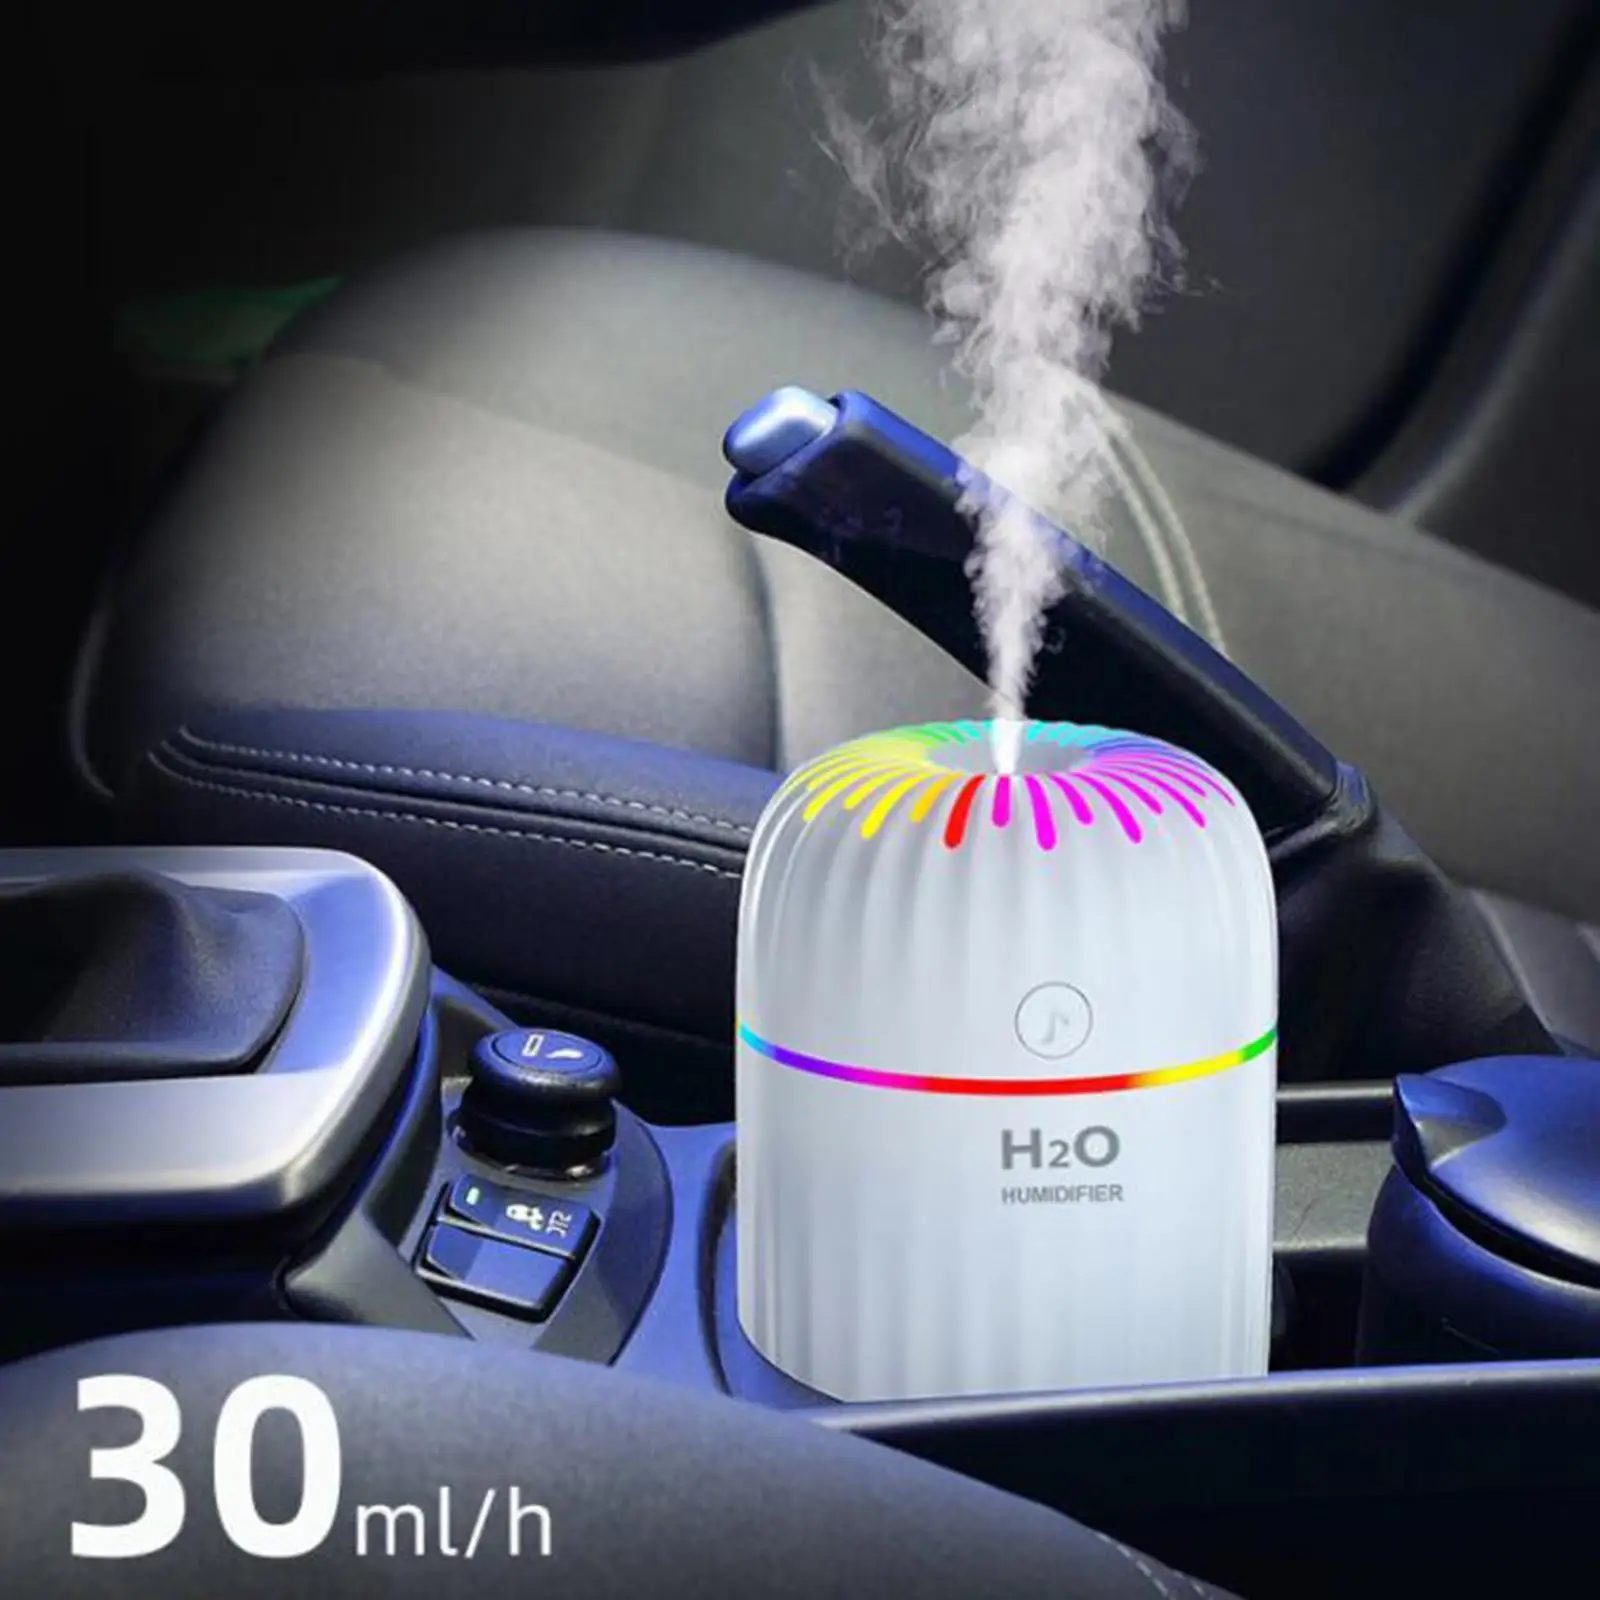 Mini Ultrasonic Cool Mist Humidifier Night Light Essential Oil USB Diffuser for Office, Hotel, Home, Kitchen, Car